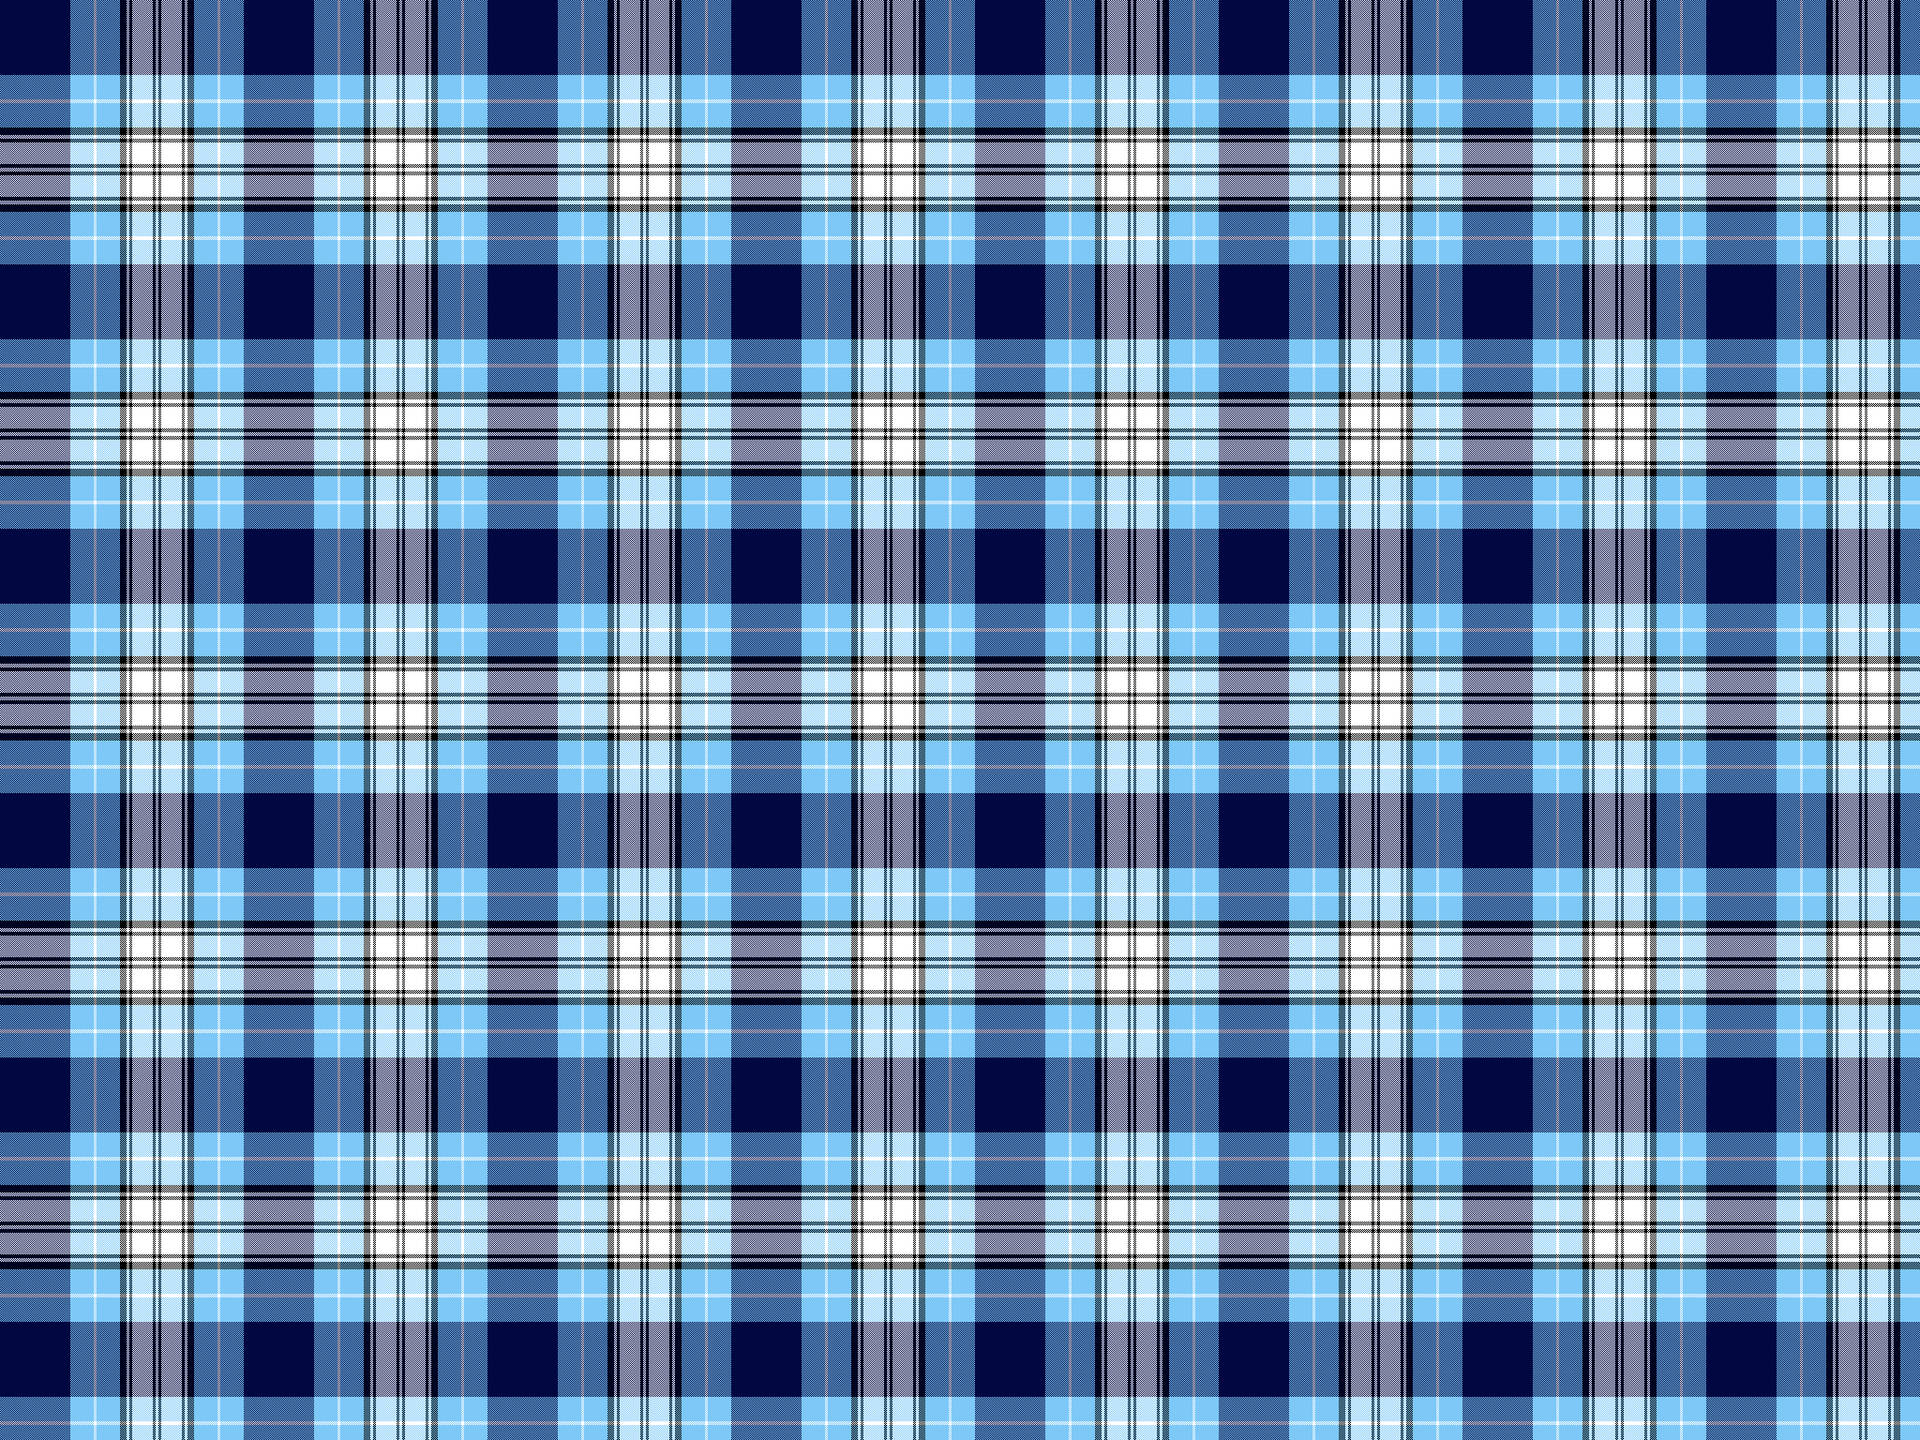 Blue Checkered Background Images  Free Download on Freepik